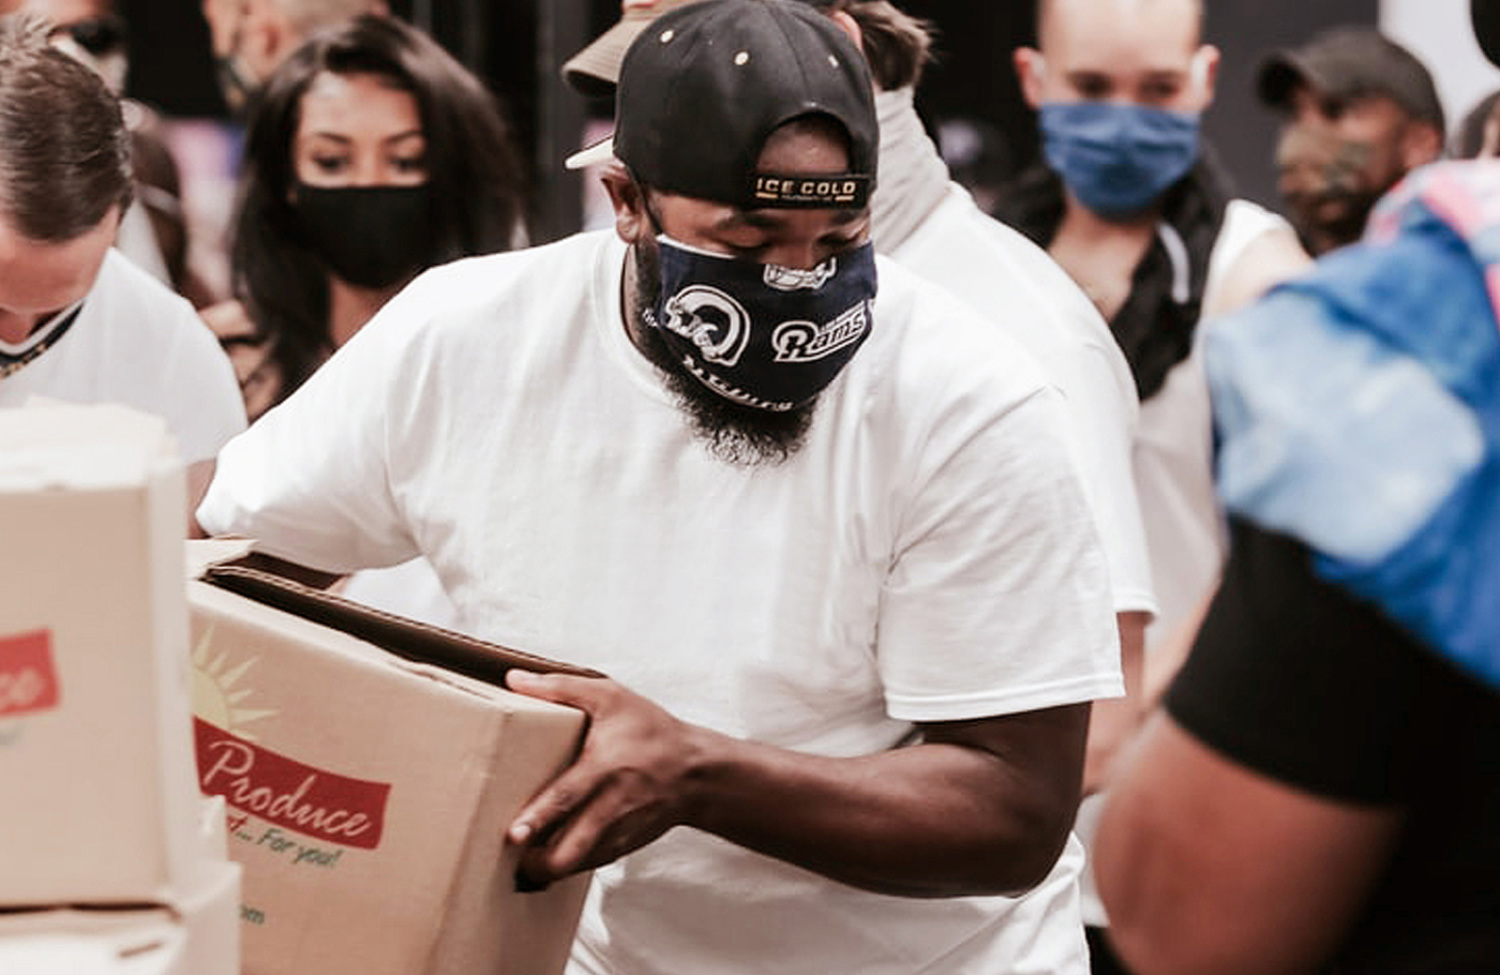 man wearing a face mask, holding box of produce